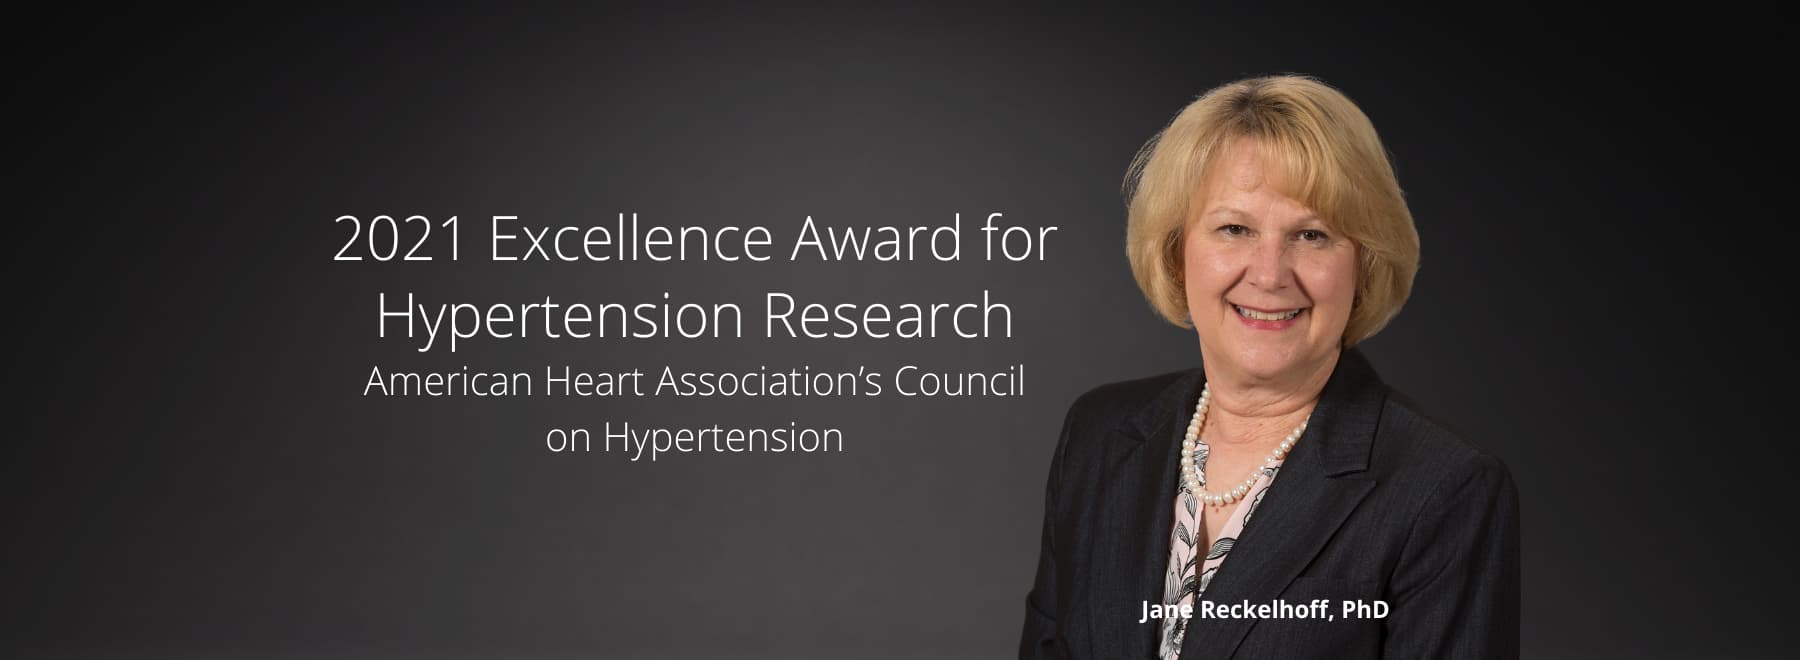 Jane Reckelhoff, PhD is the 2021 Excellence in Research Award winner for Hypertension Research from the American Heart Association's Council on Hypertension